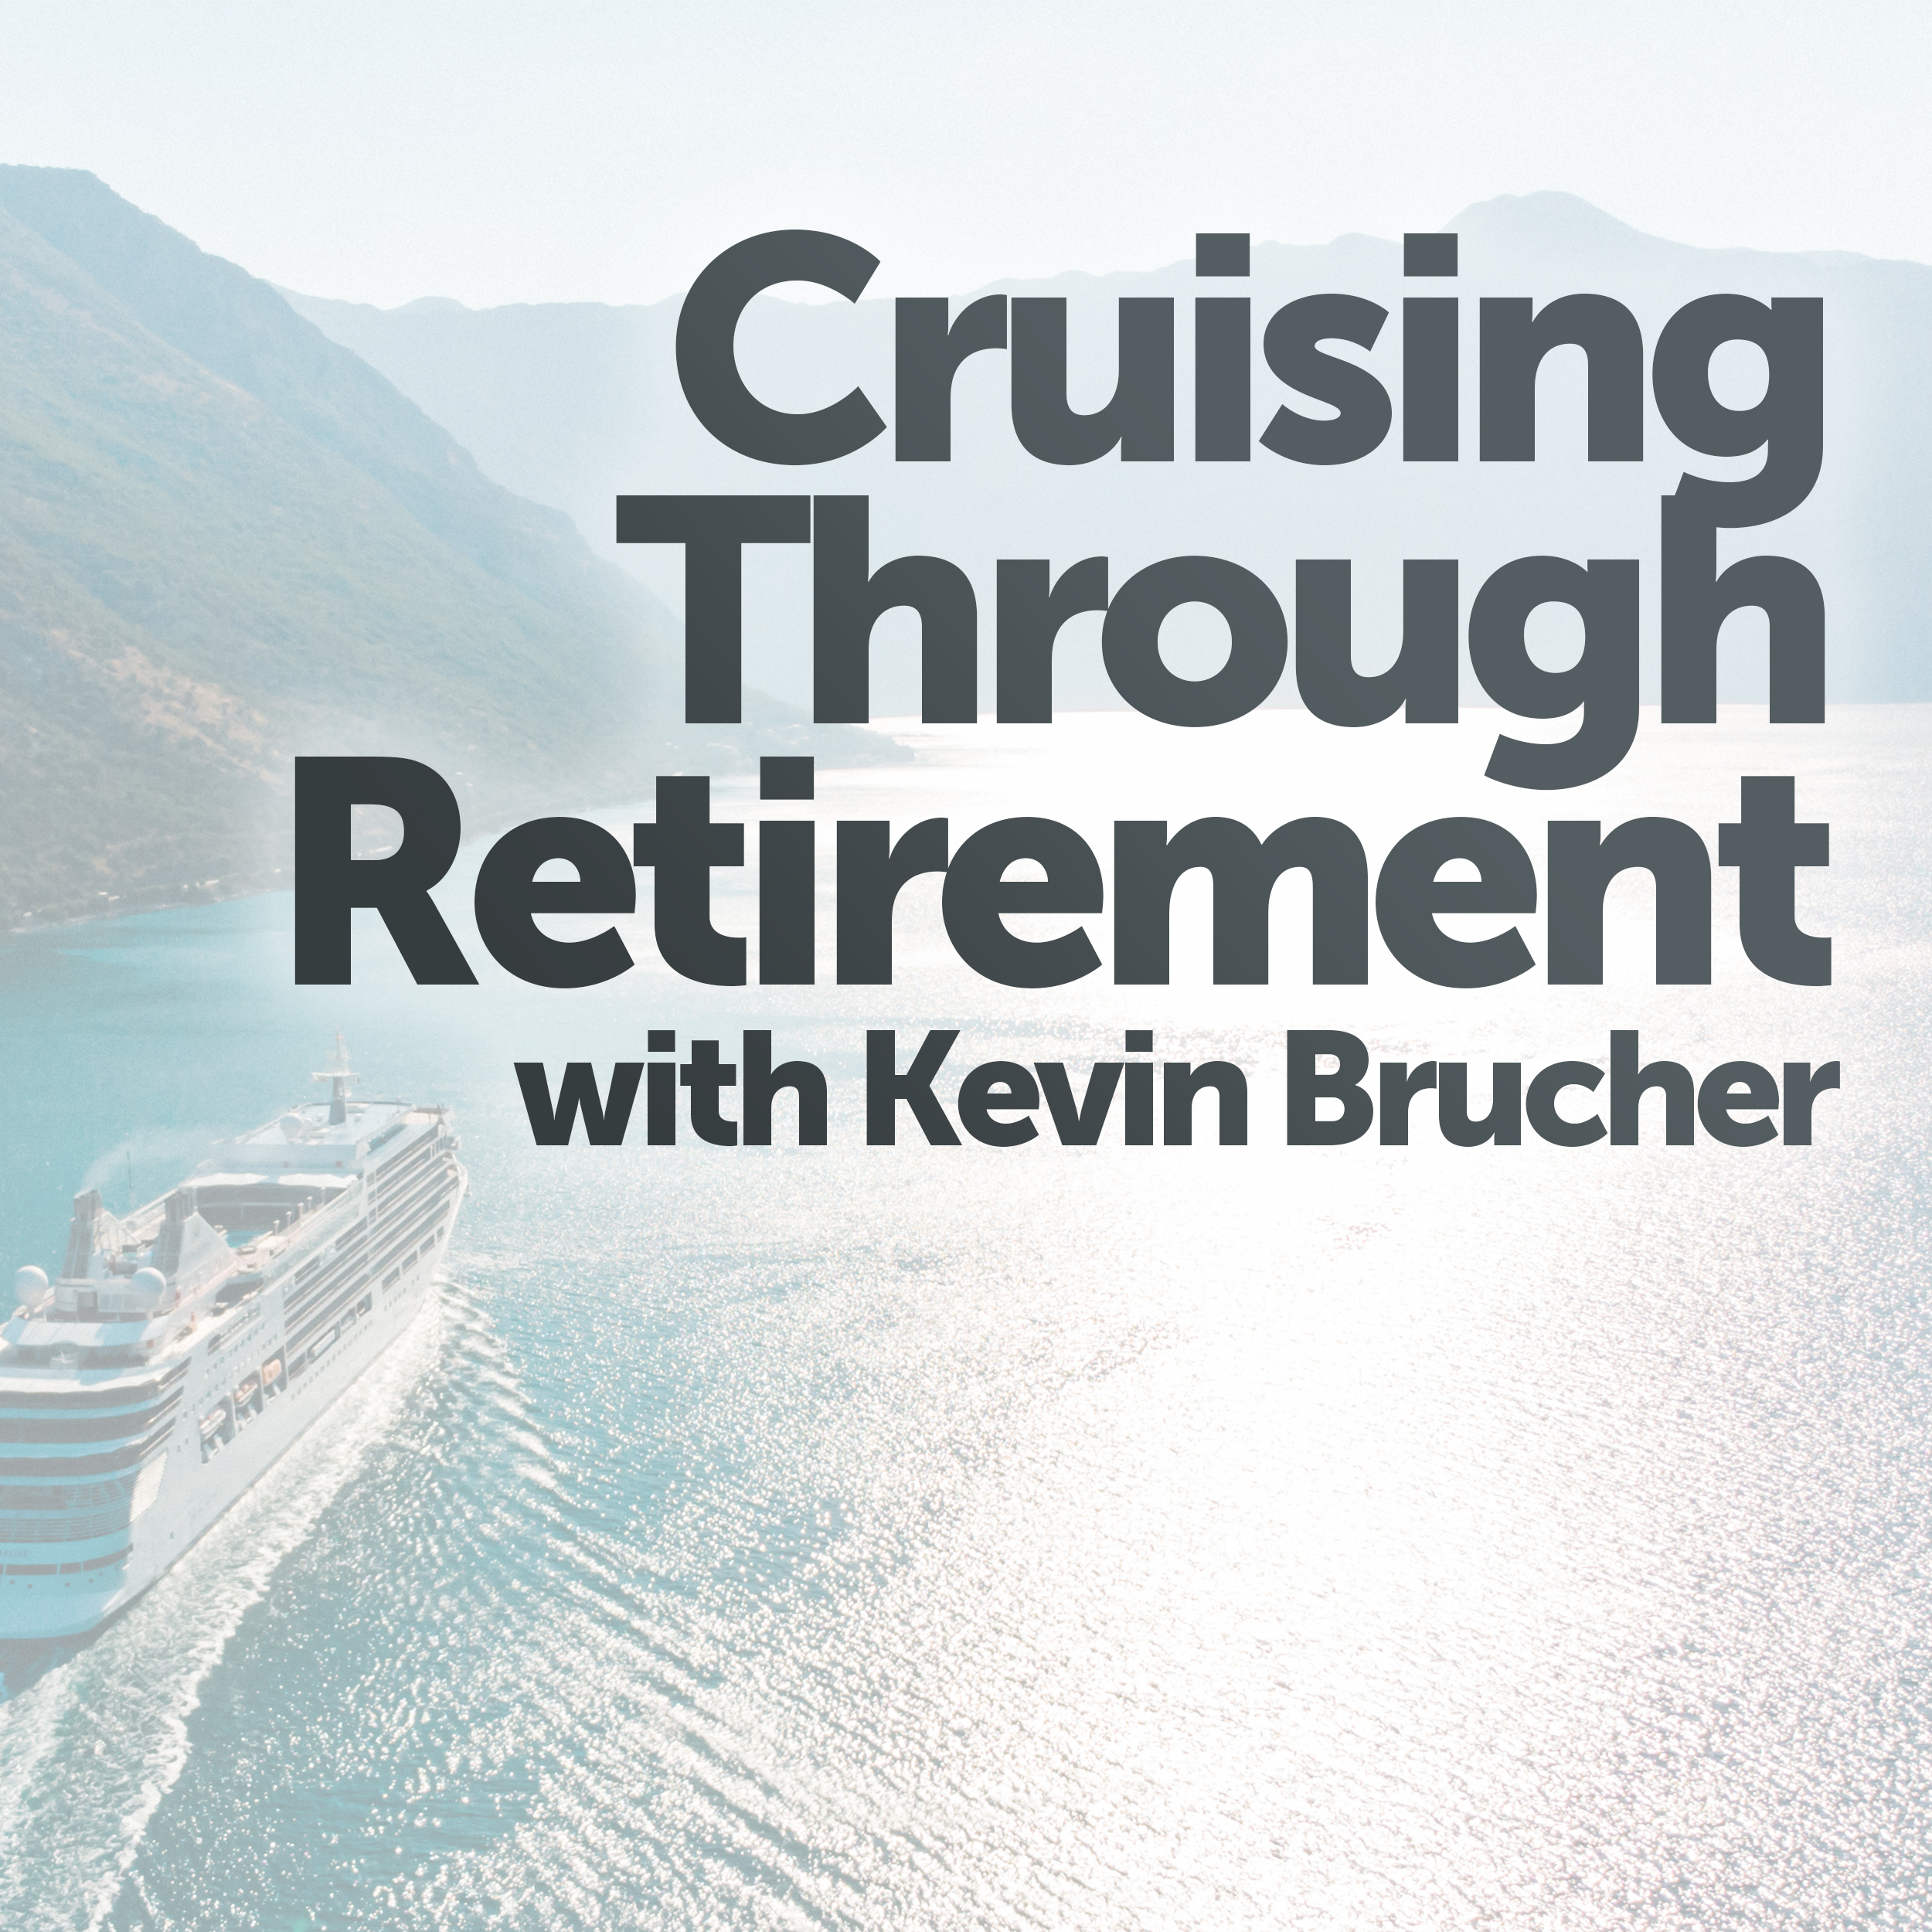 Cruising Through Retirement This week Kevin Brucher explores a number of quotes that could inspire you to keep the discipline and embrace the sacrifice.